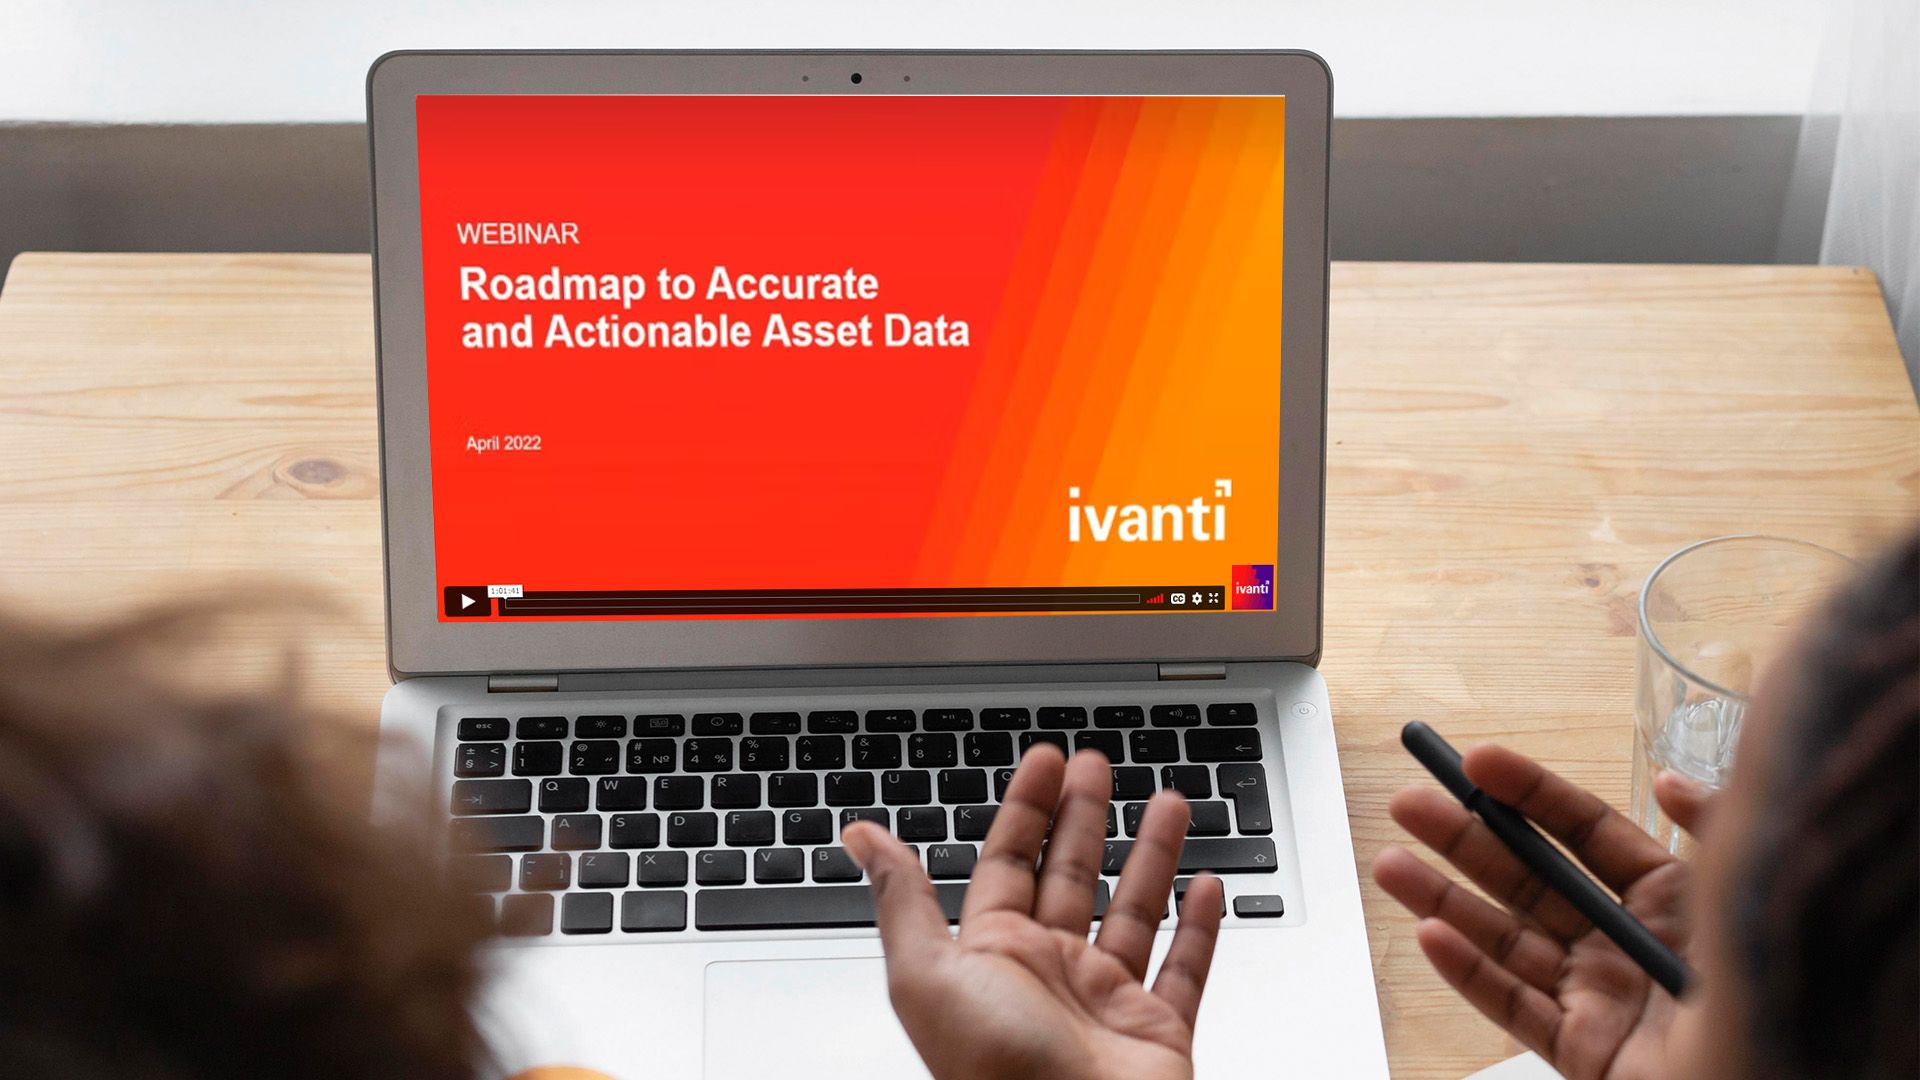 Ultimate guide to attaining accurate and actionable asset data